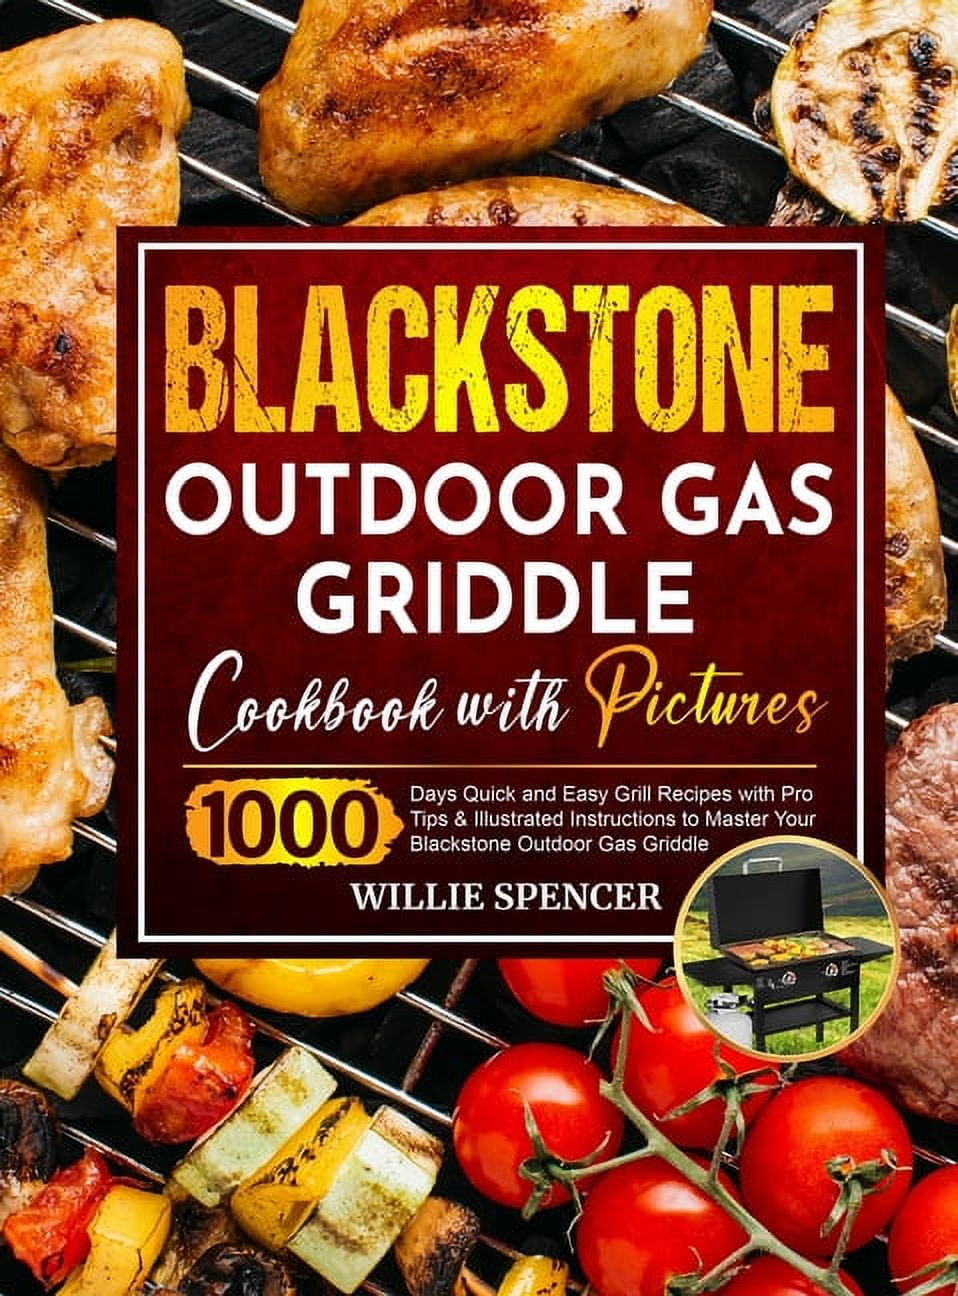 How to Season a Blackstone Griddle (Easy Step by Step Guide)